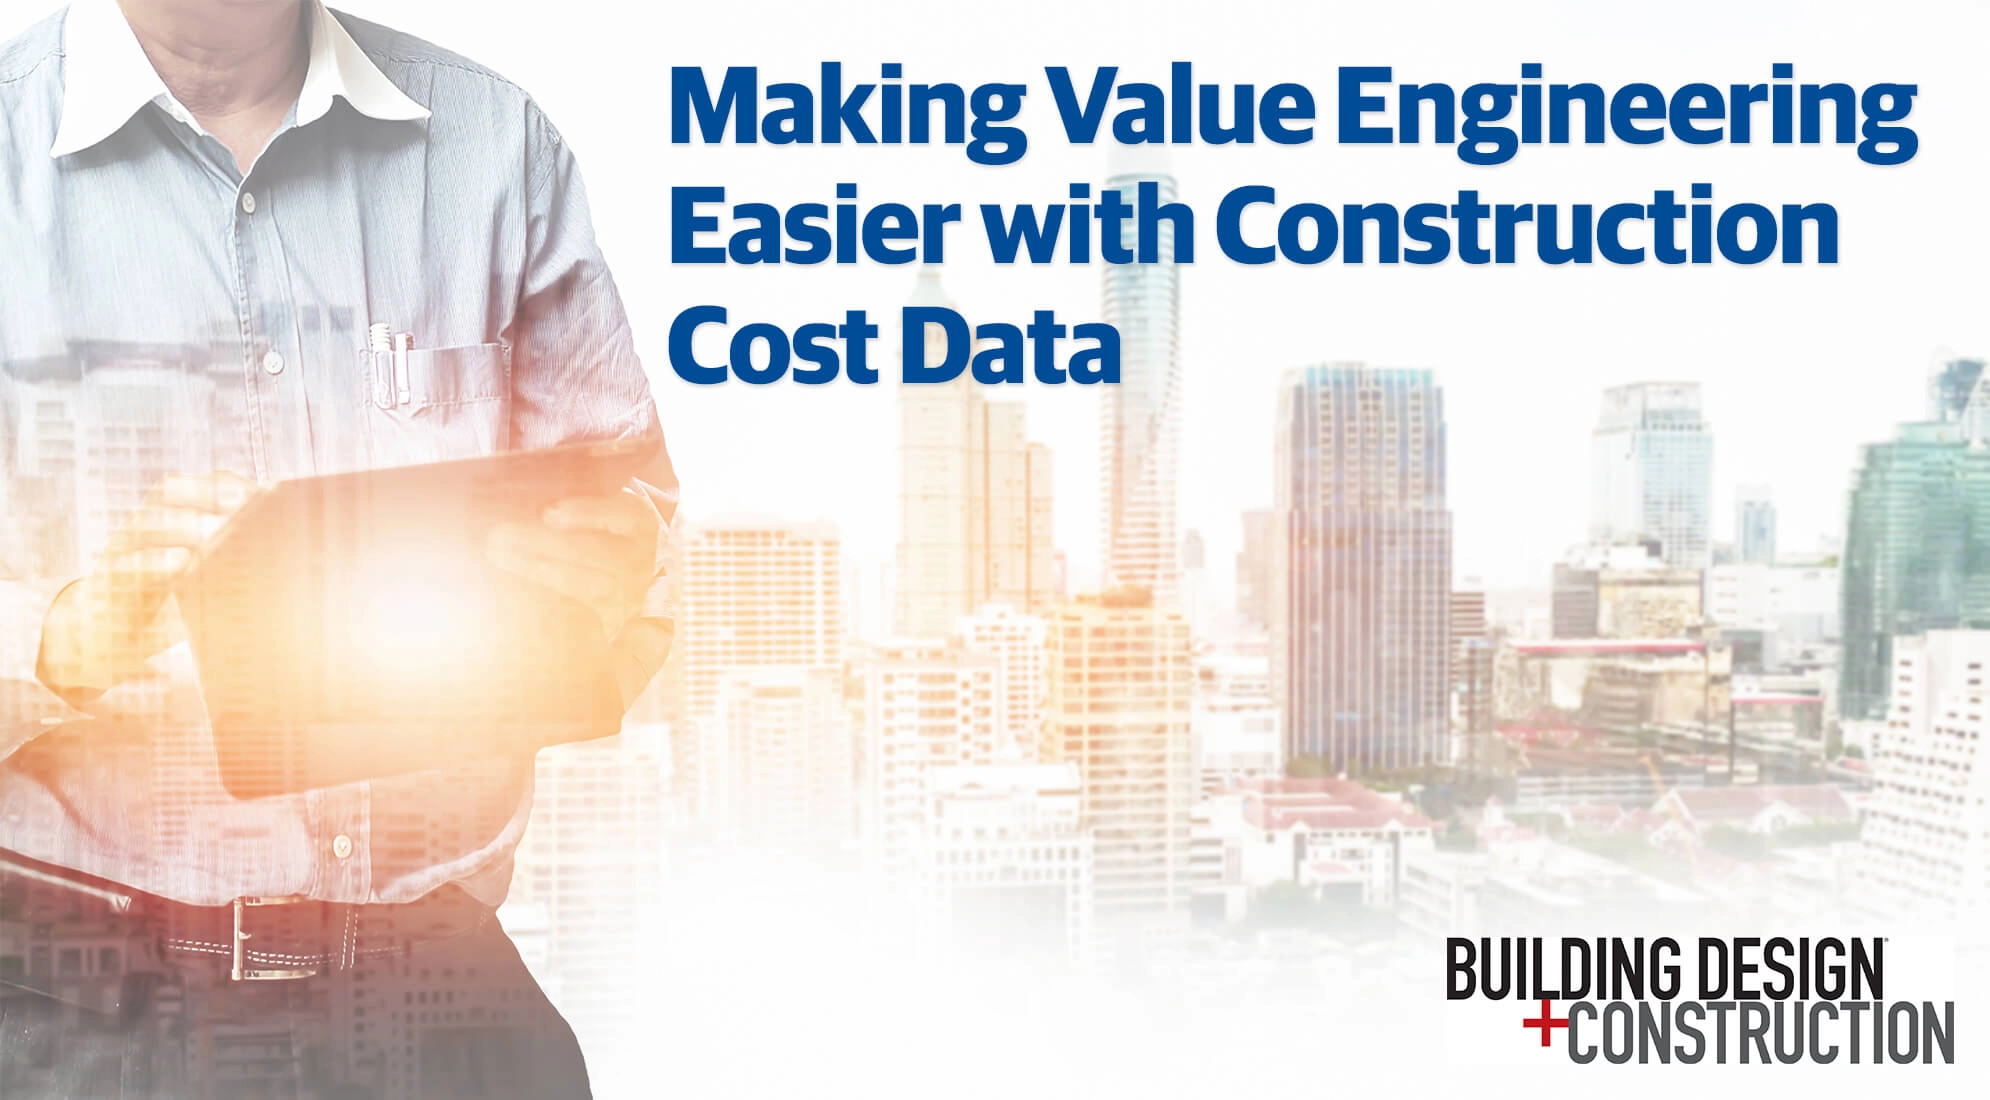 Making Value Engineering Easier with Construction Cost Data